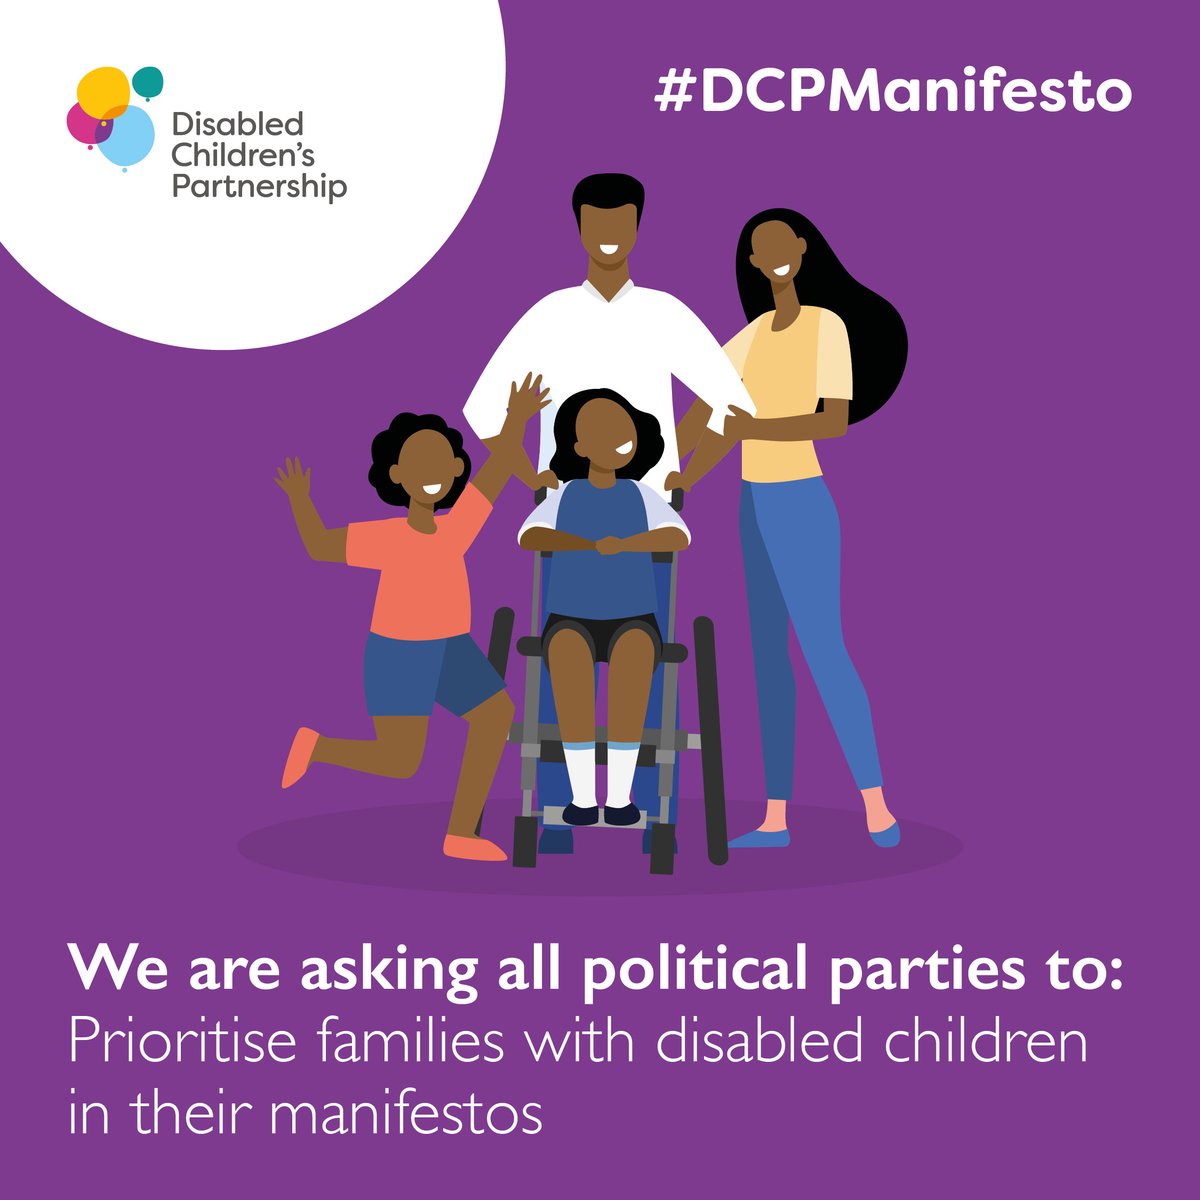 We've joined over 110 charities and parent groups to campaign for better support for disabled children and their families. 👉🏾 Find out more about the three-point #DCPManifesto: loom.ly/6DC75C4